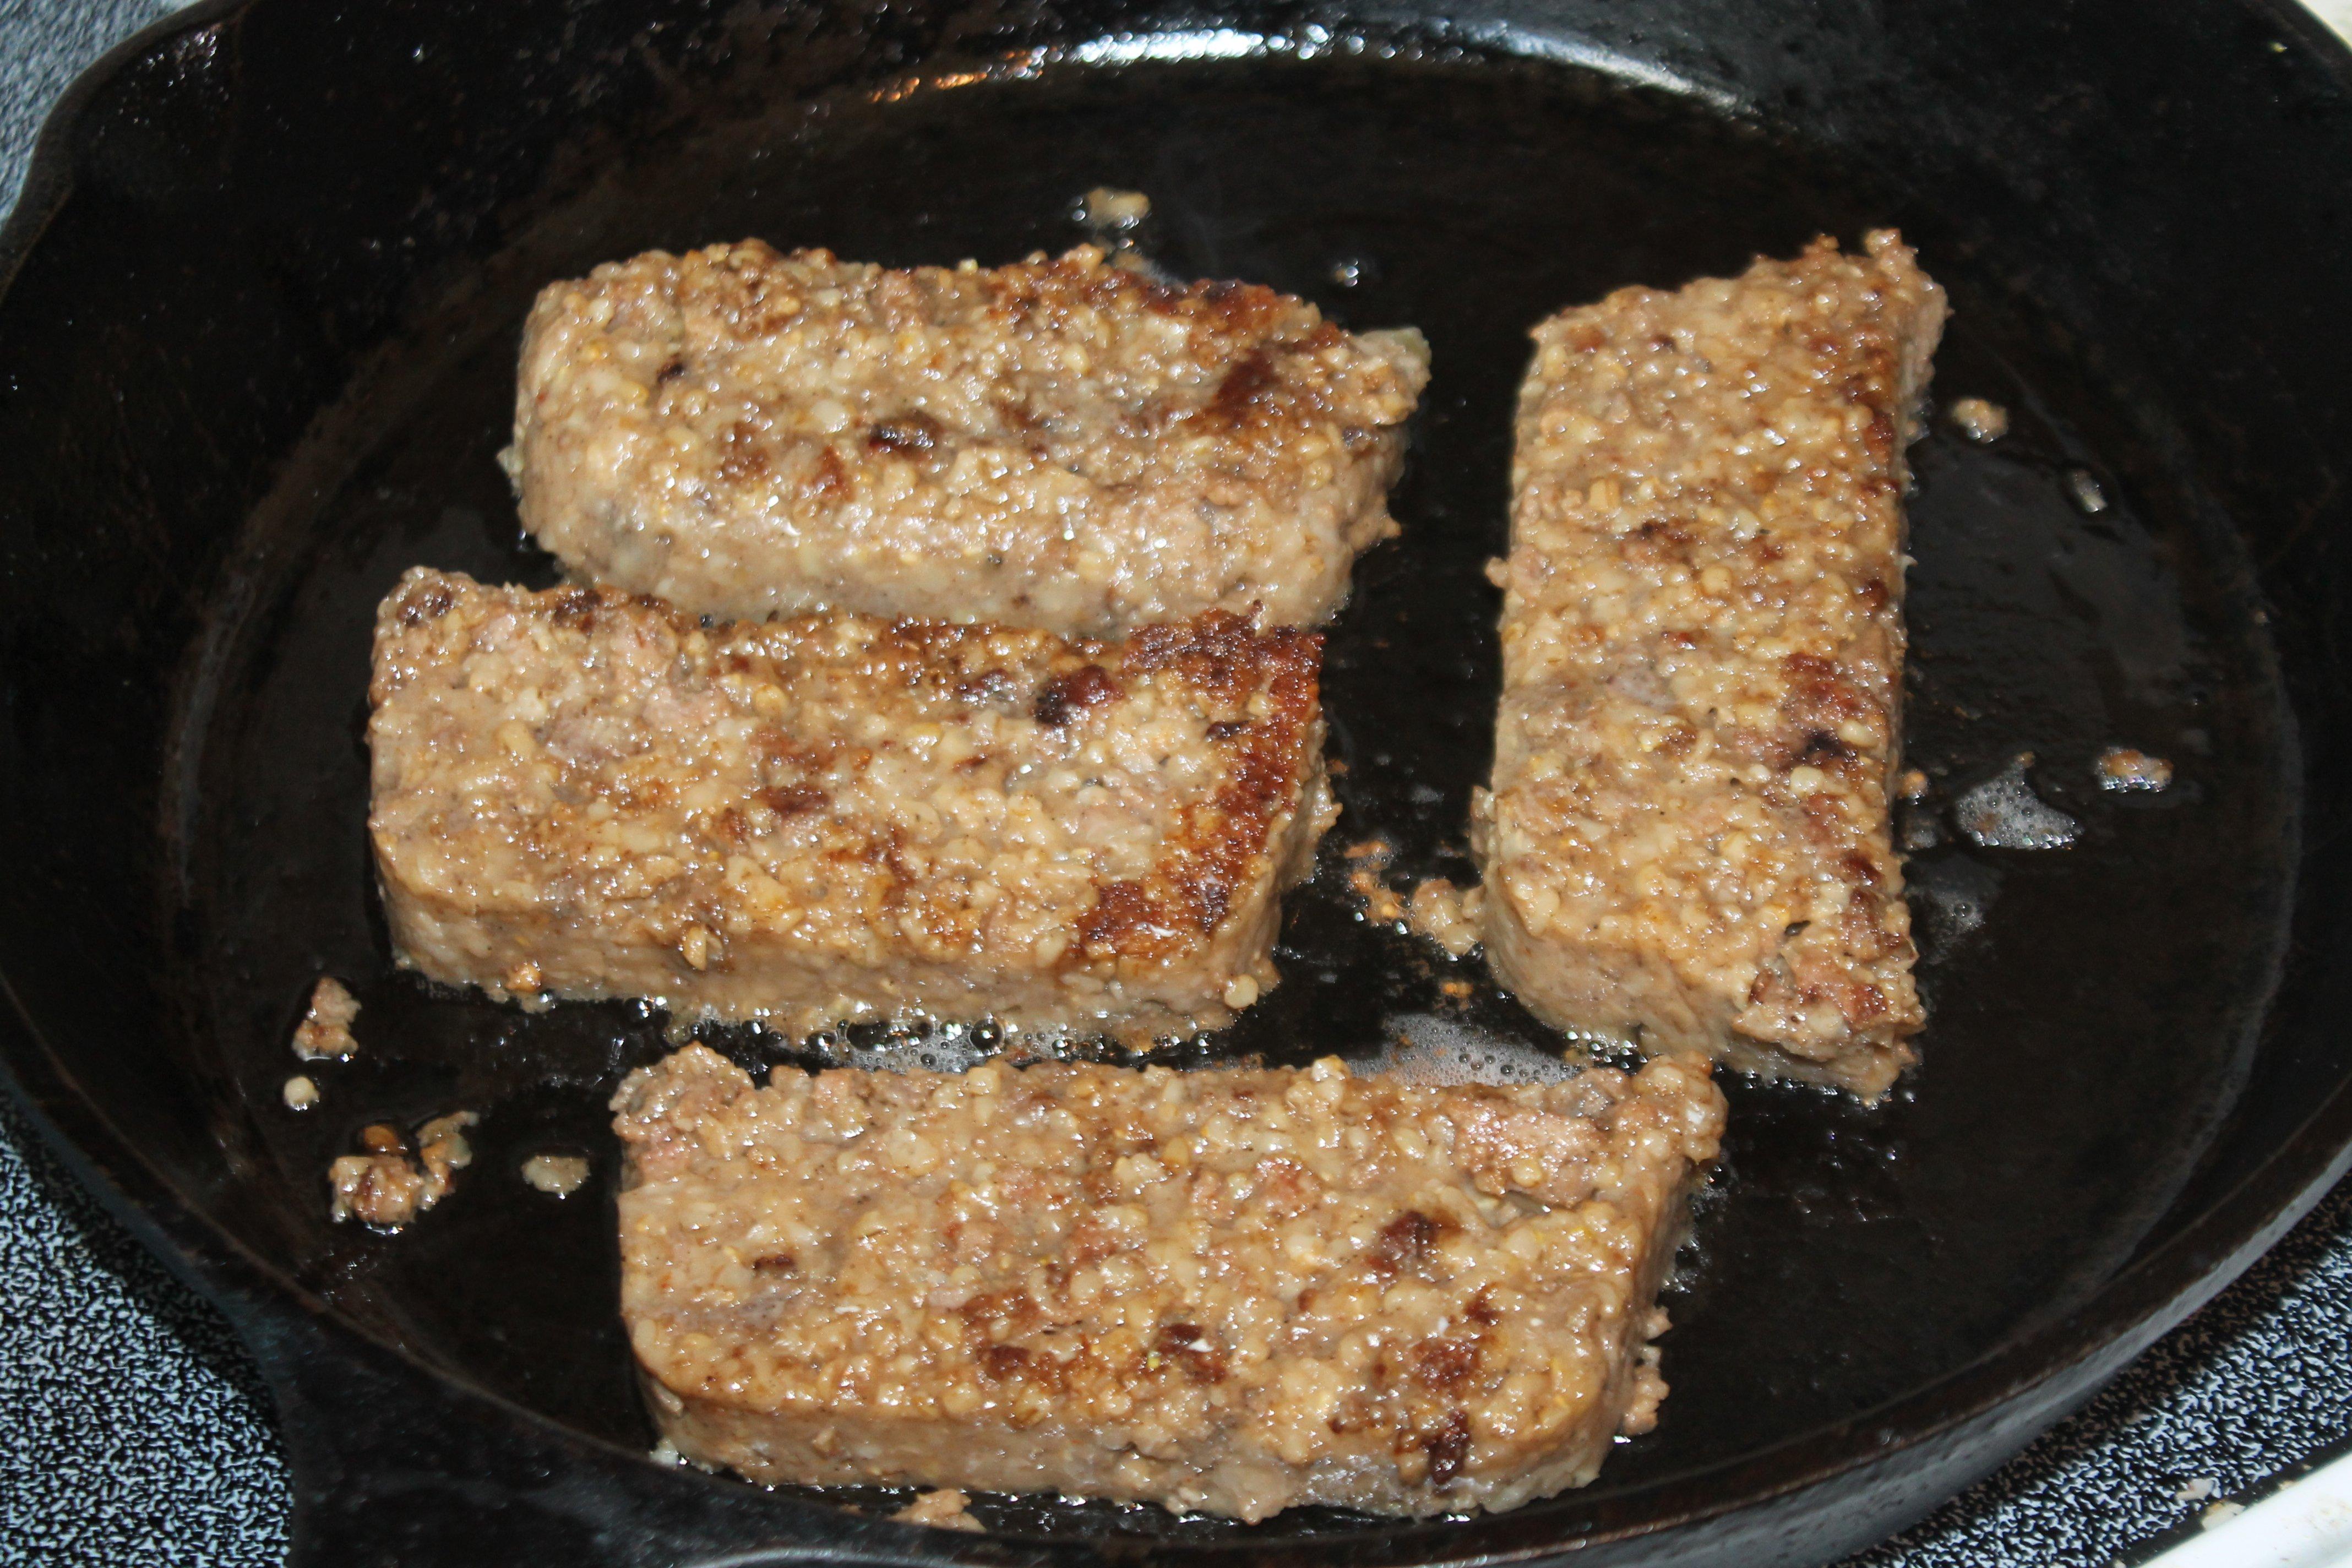 Brown the sliced goetta in oil, three to four minutes per side.